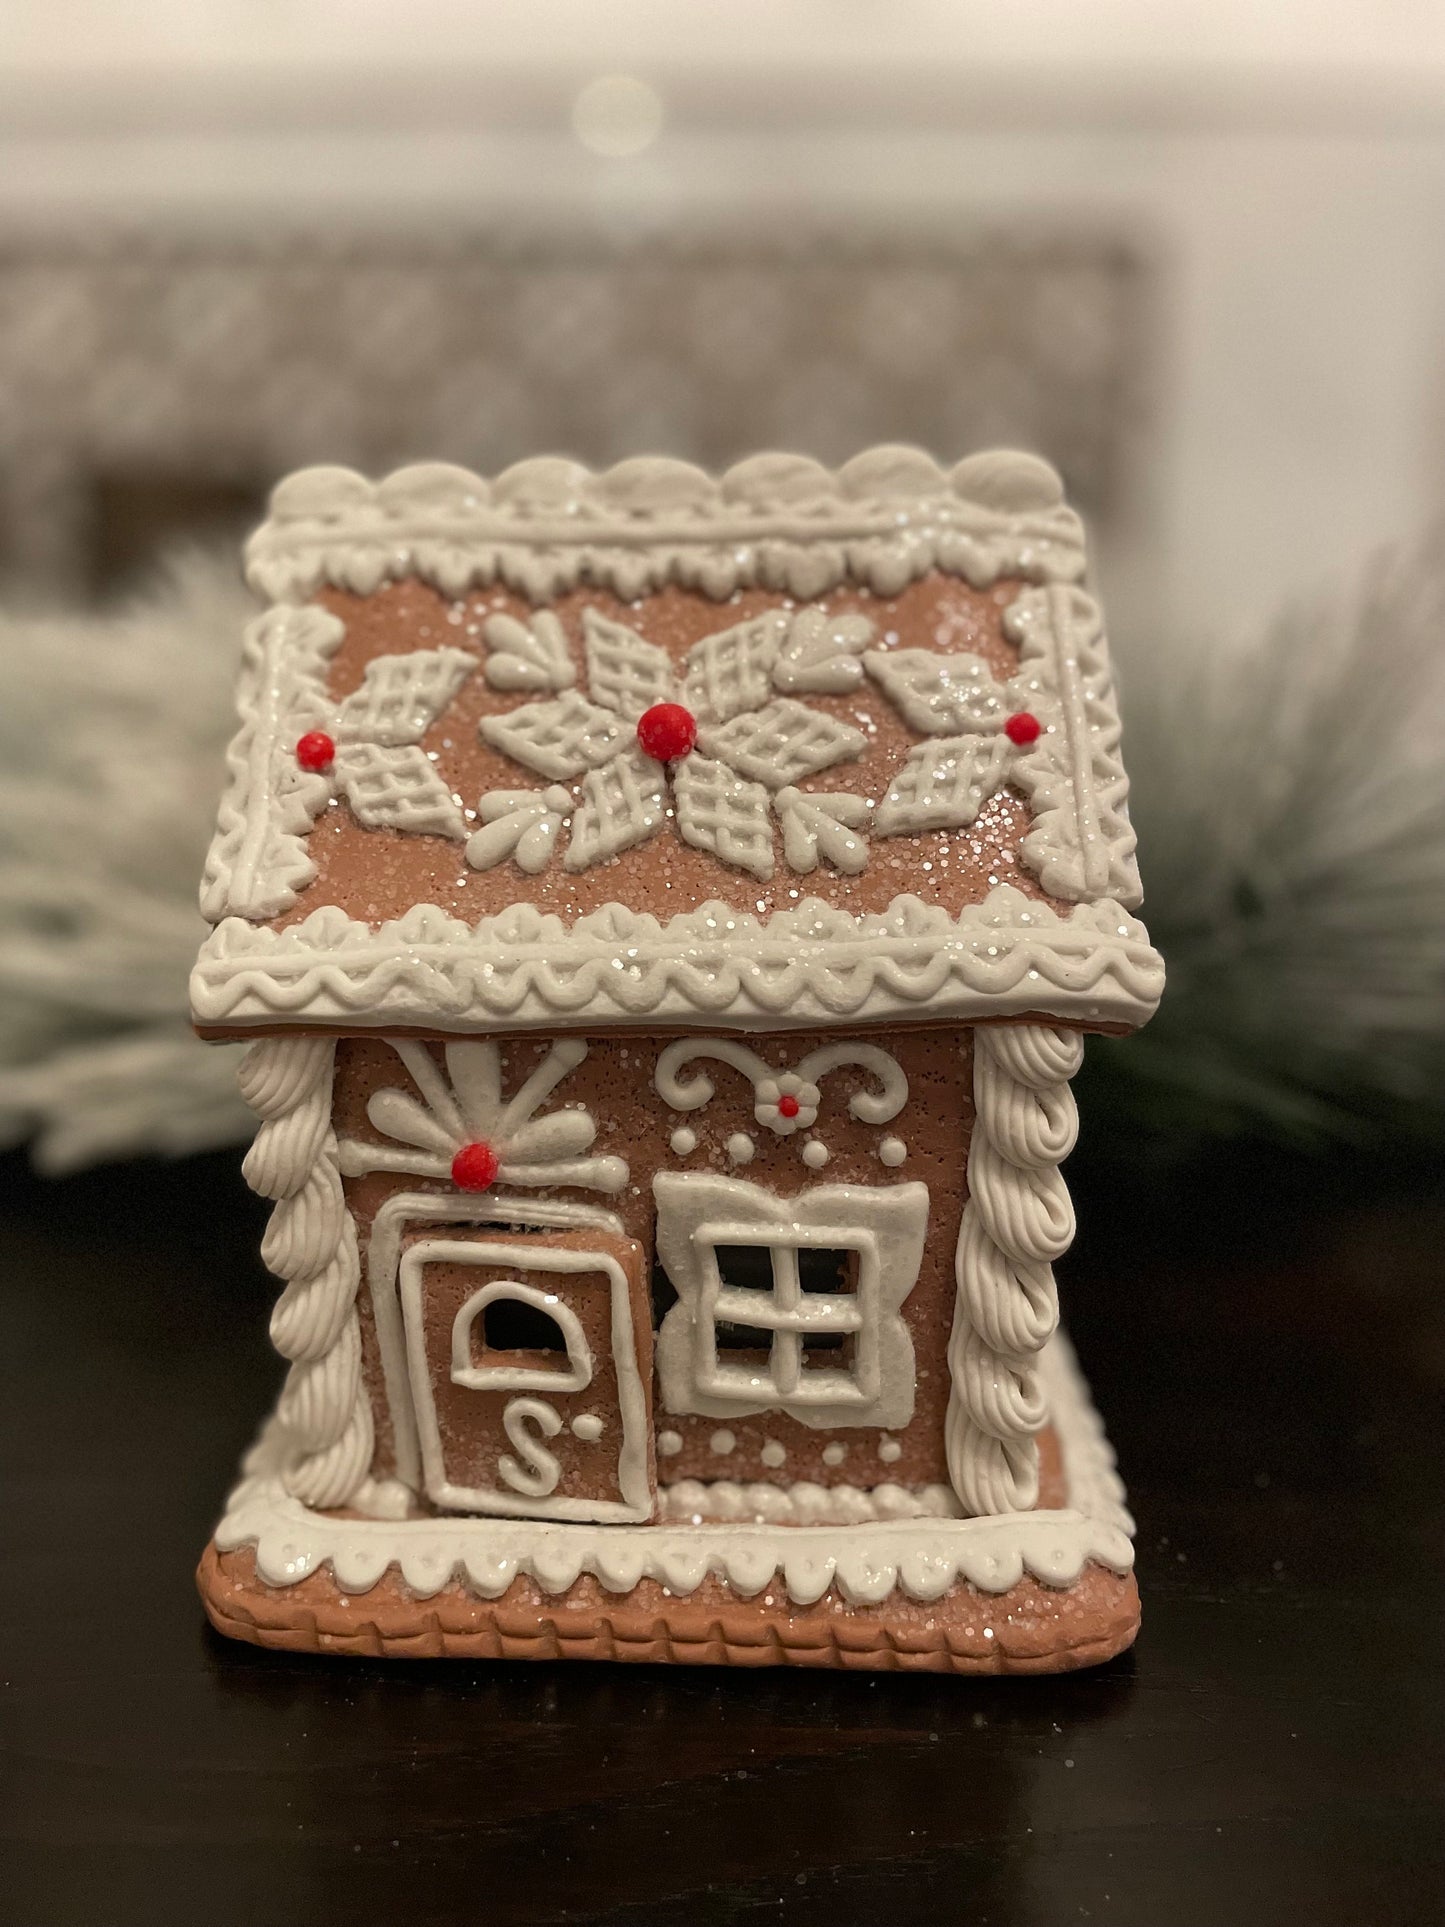 6”H x 5”W. Gingerbread lighted house.